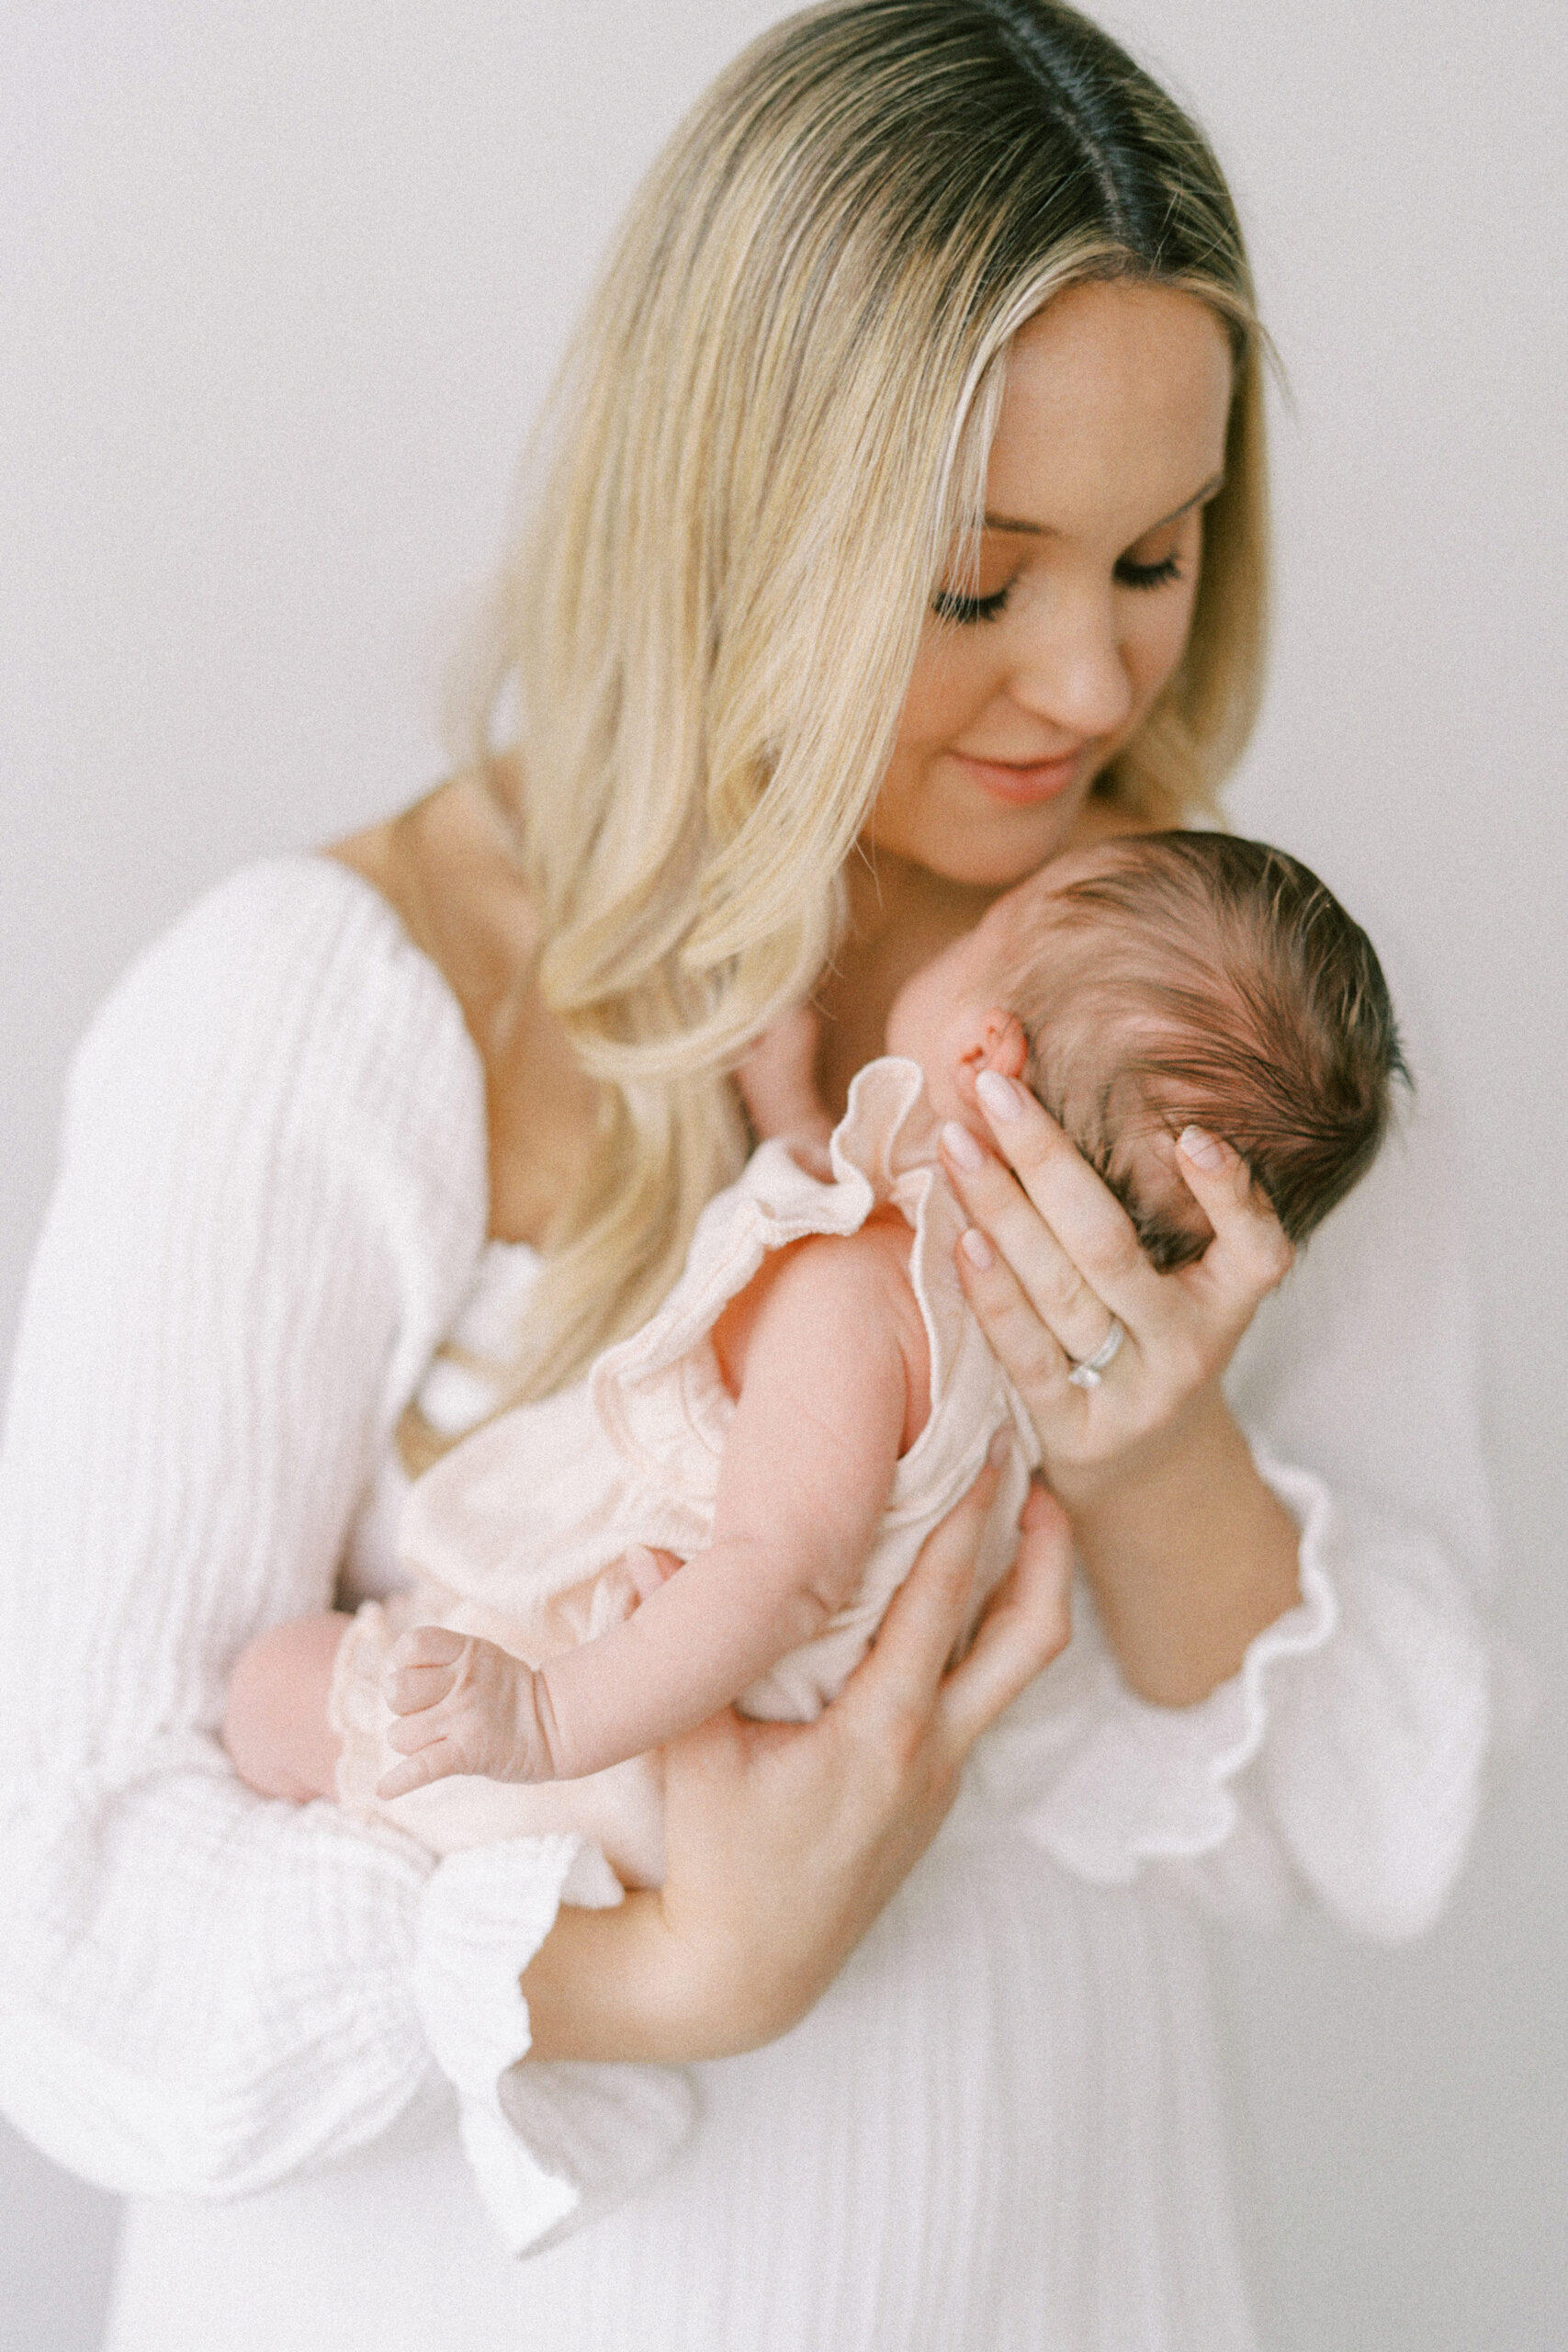 Newborn photography session featuring mom and baby.